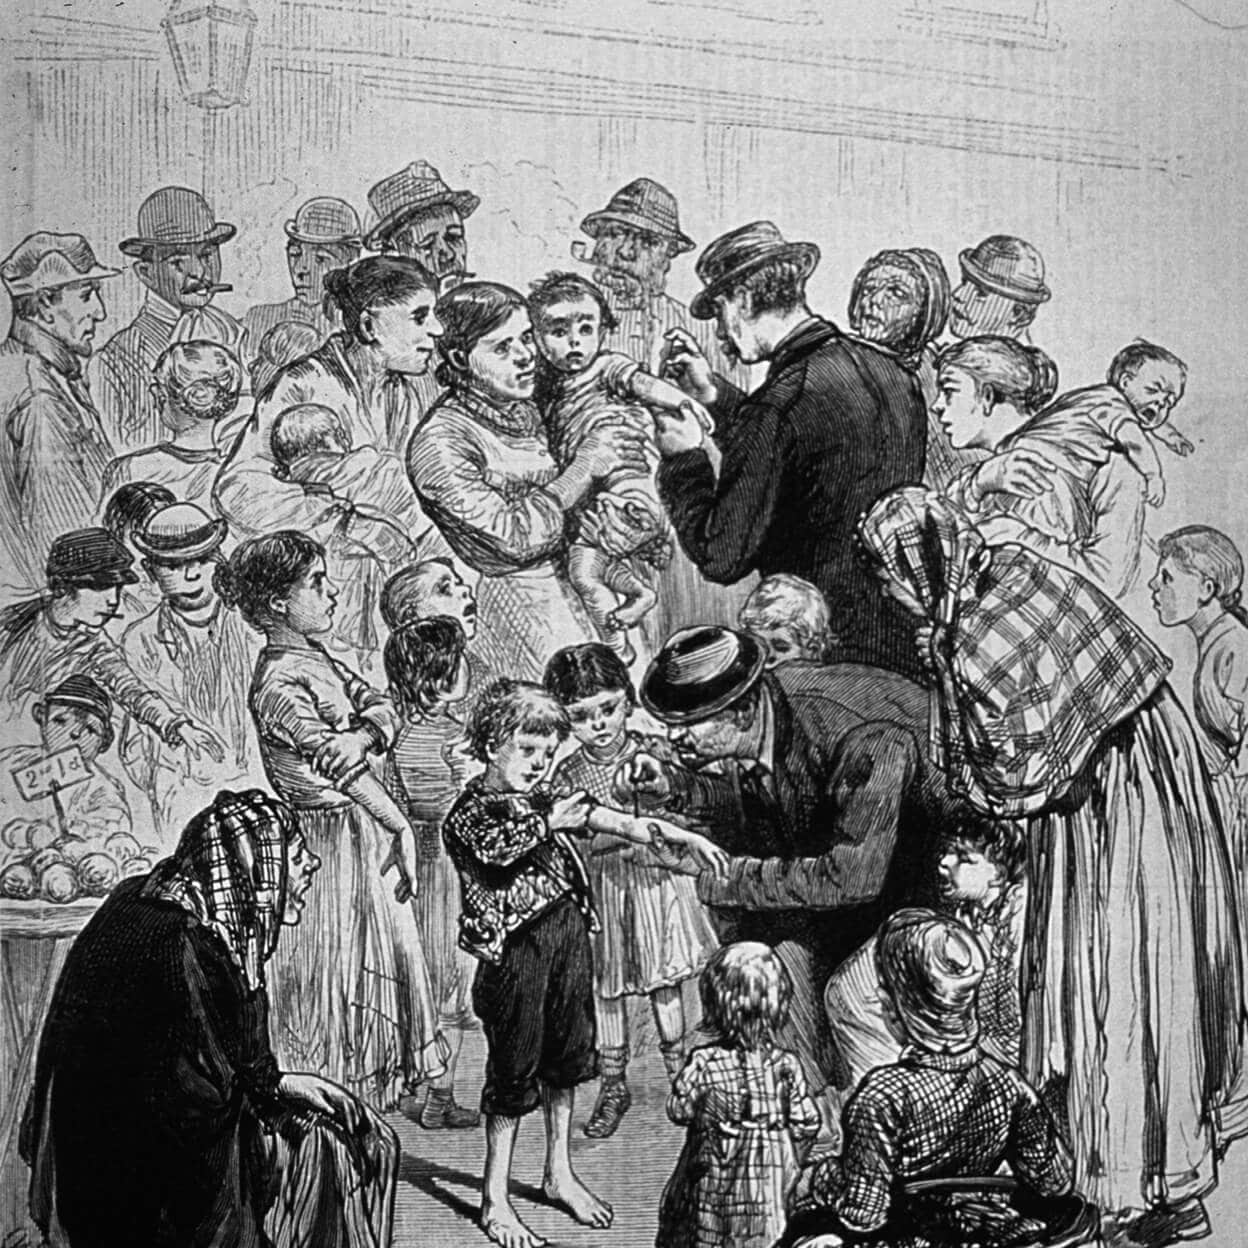 A crowd of people gathered to get smallpox vaccines